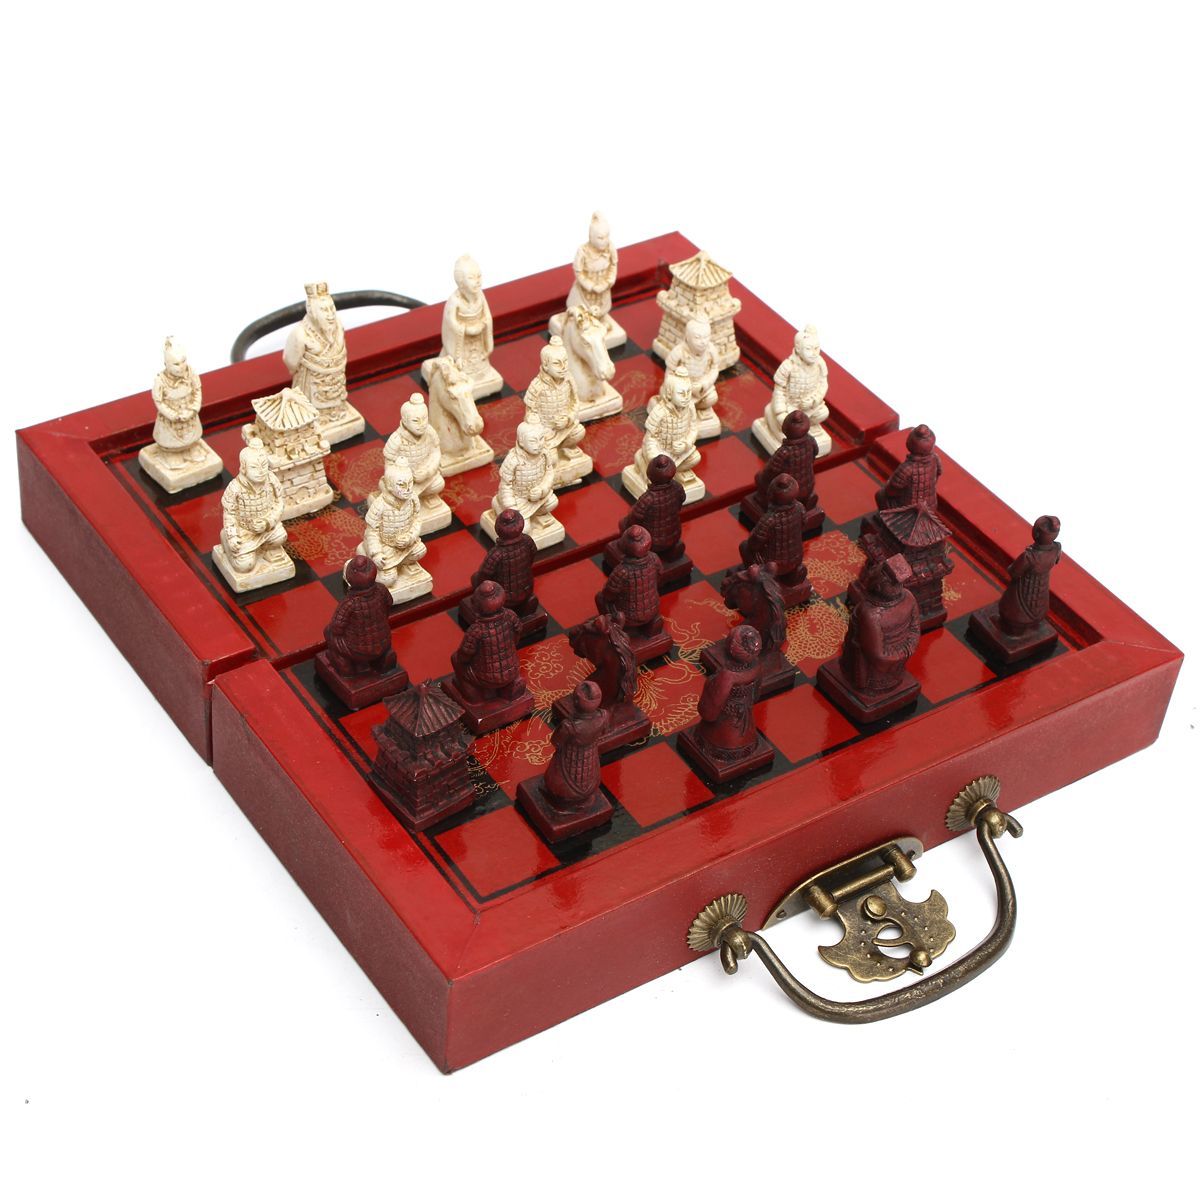 32-Pcs-Terra-Cotta-Warriors-Figure-Chess-Set-with-Chinese-Wood-Leather-Box-Board-Games-1473219